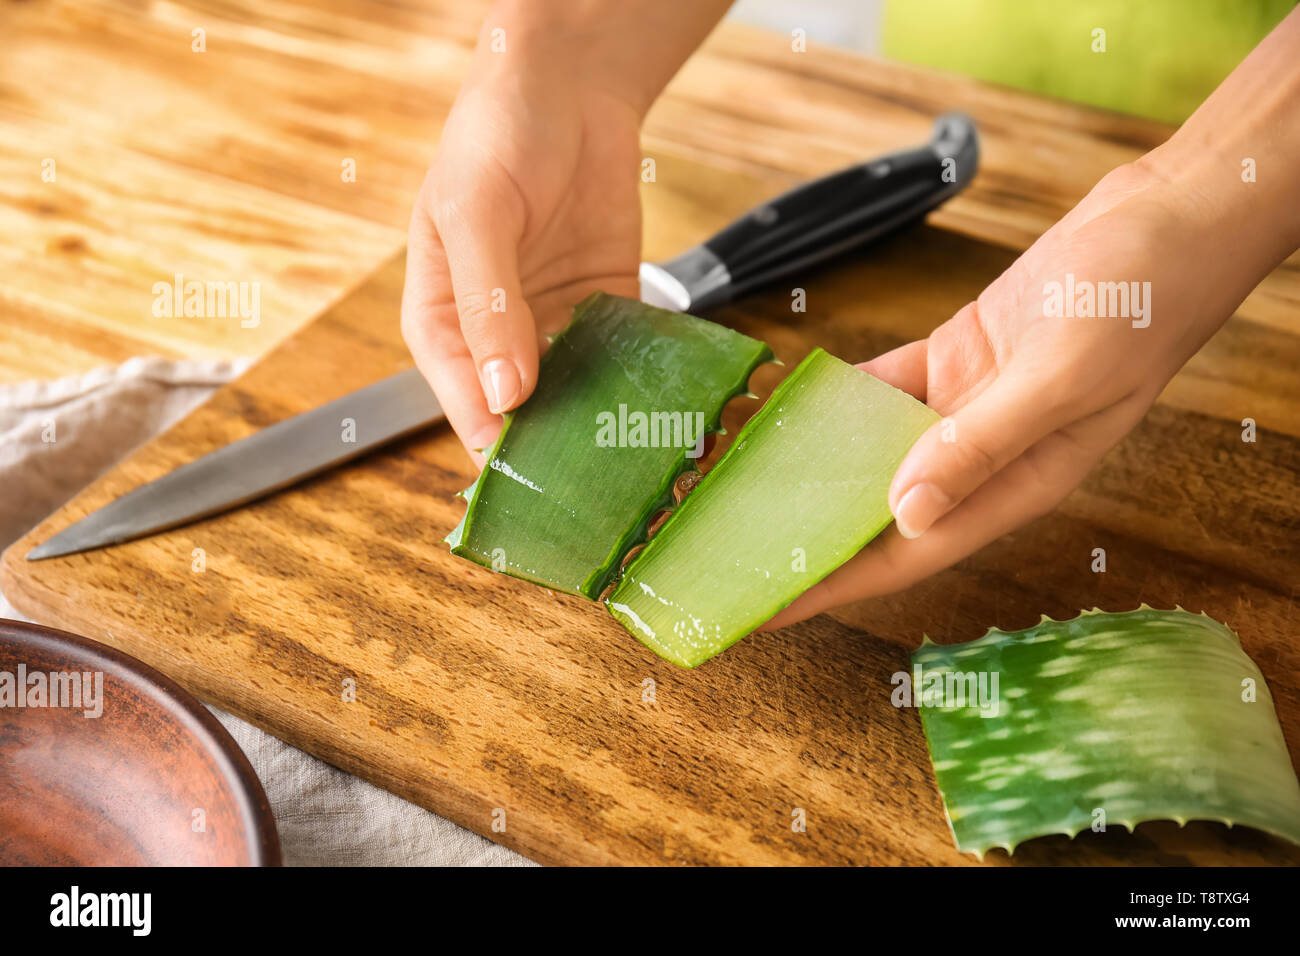 Cut aloe vera hi-res stock photography and images - Alamy